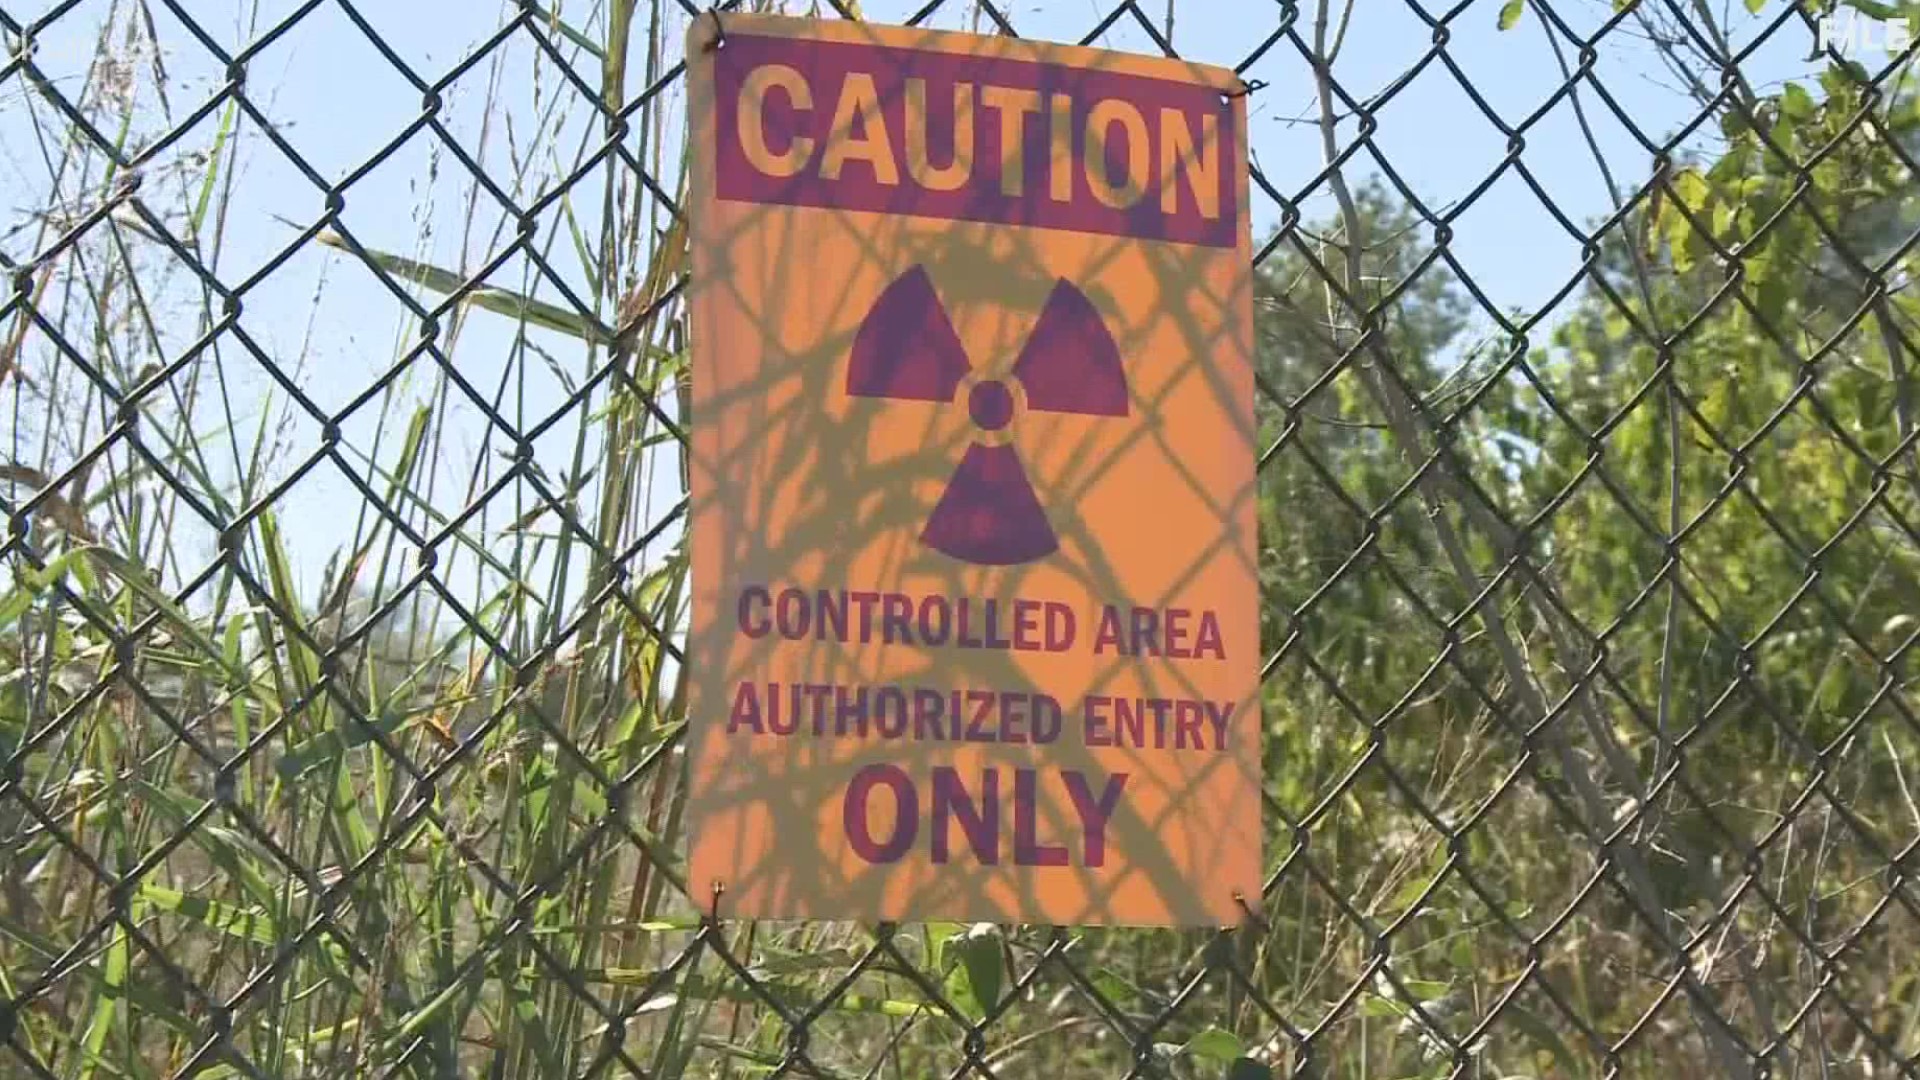 Atomic waste from 1973 is sitting on the surface of the landfill. EPA found more radioactive material than they anticipated from their most recent testing samples.